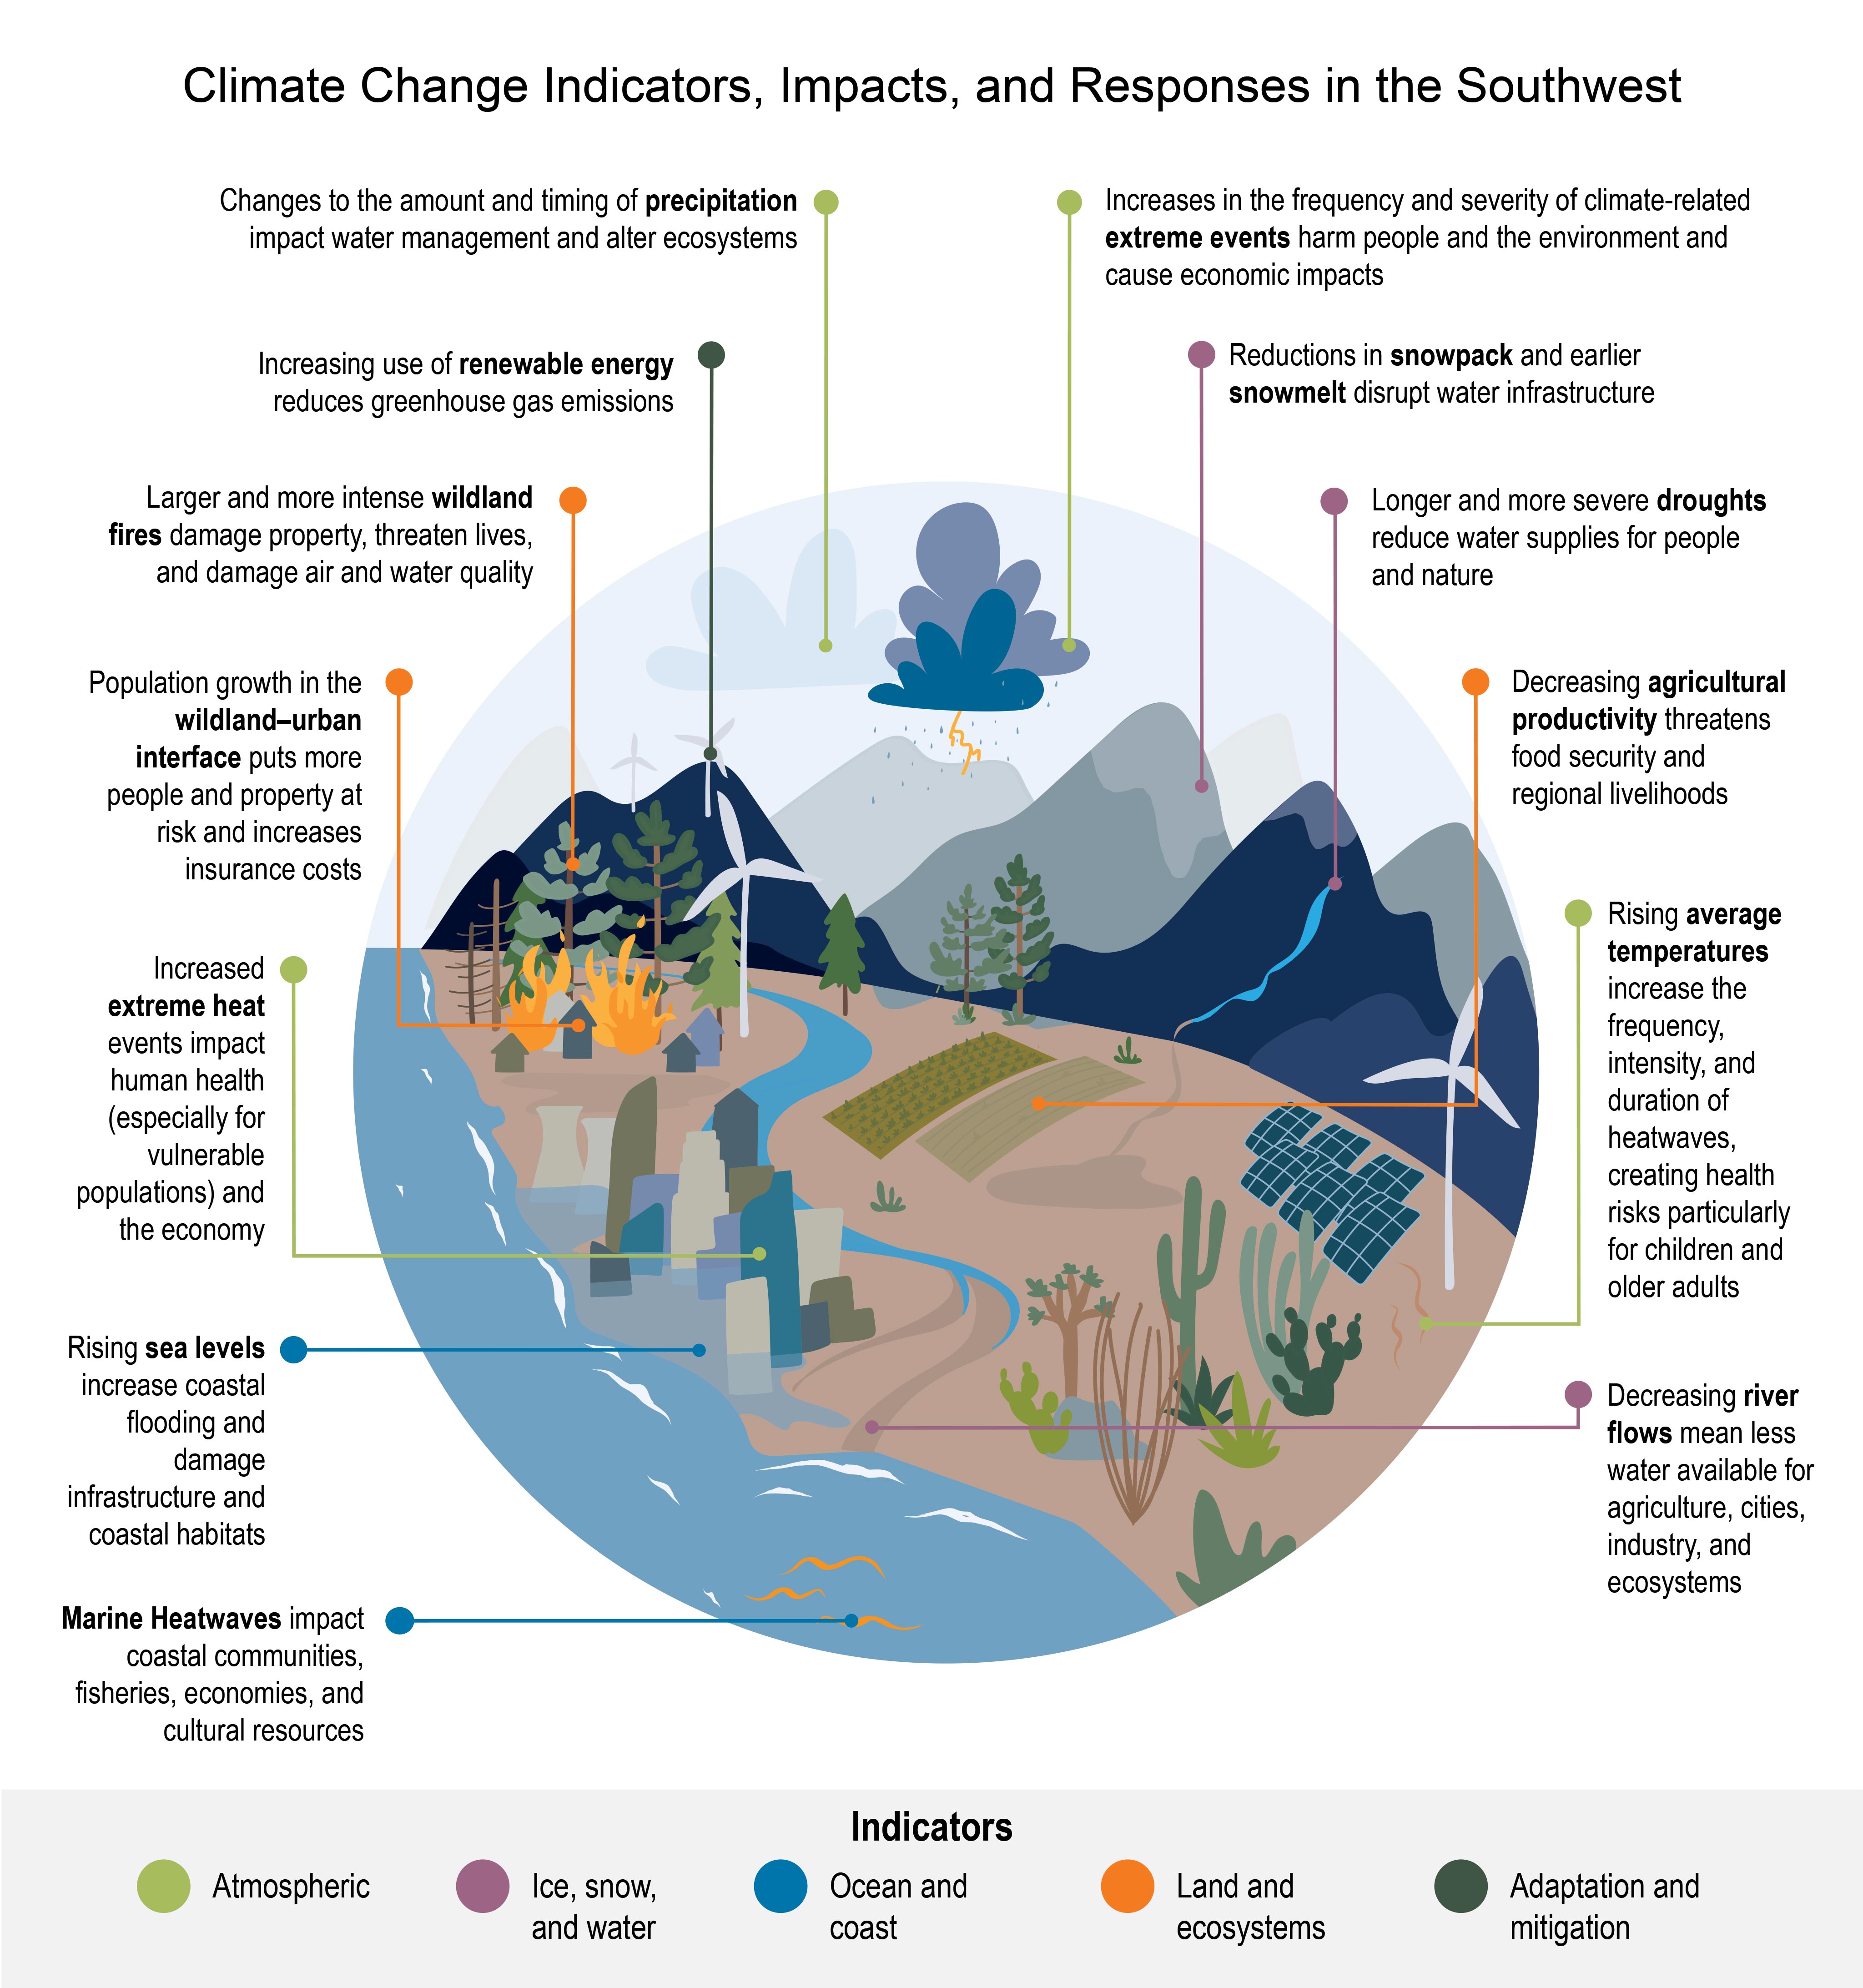 Climate change indicators in the Southwest